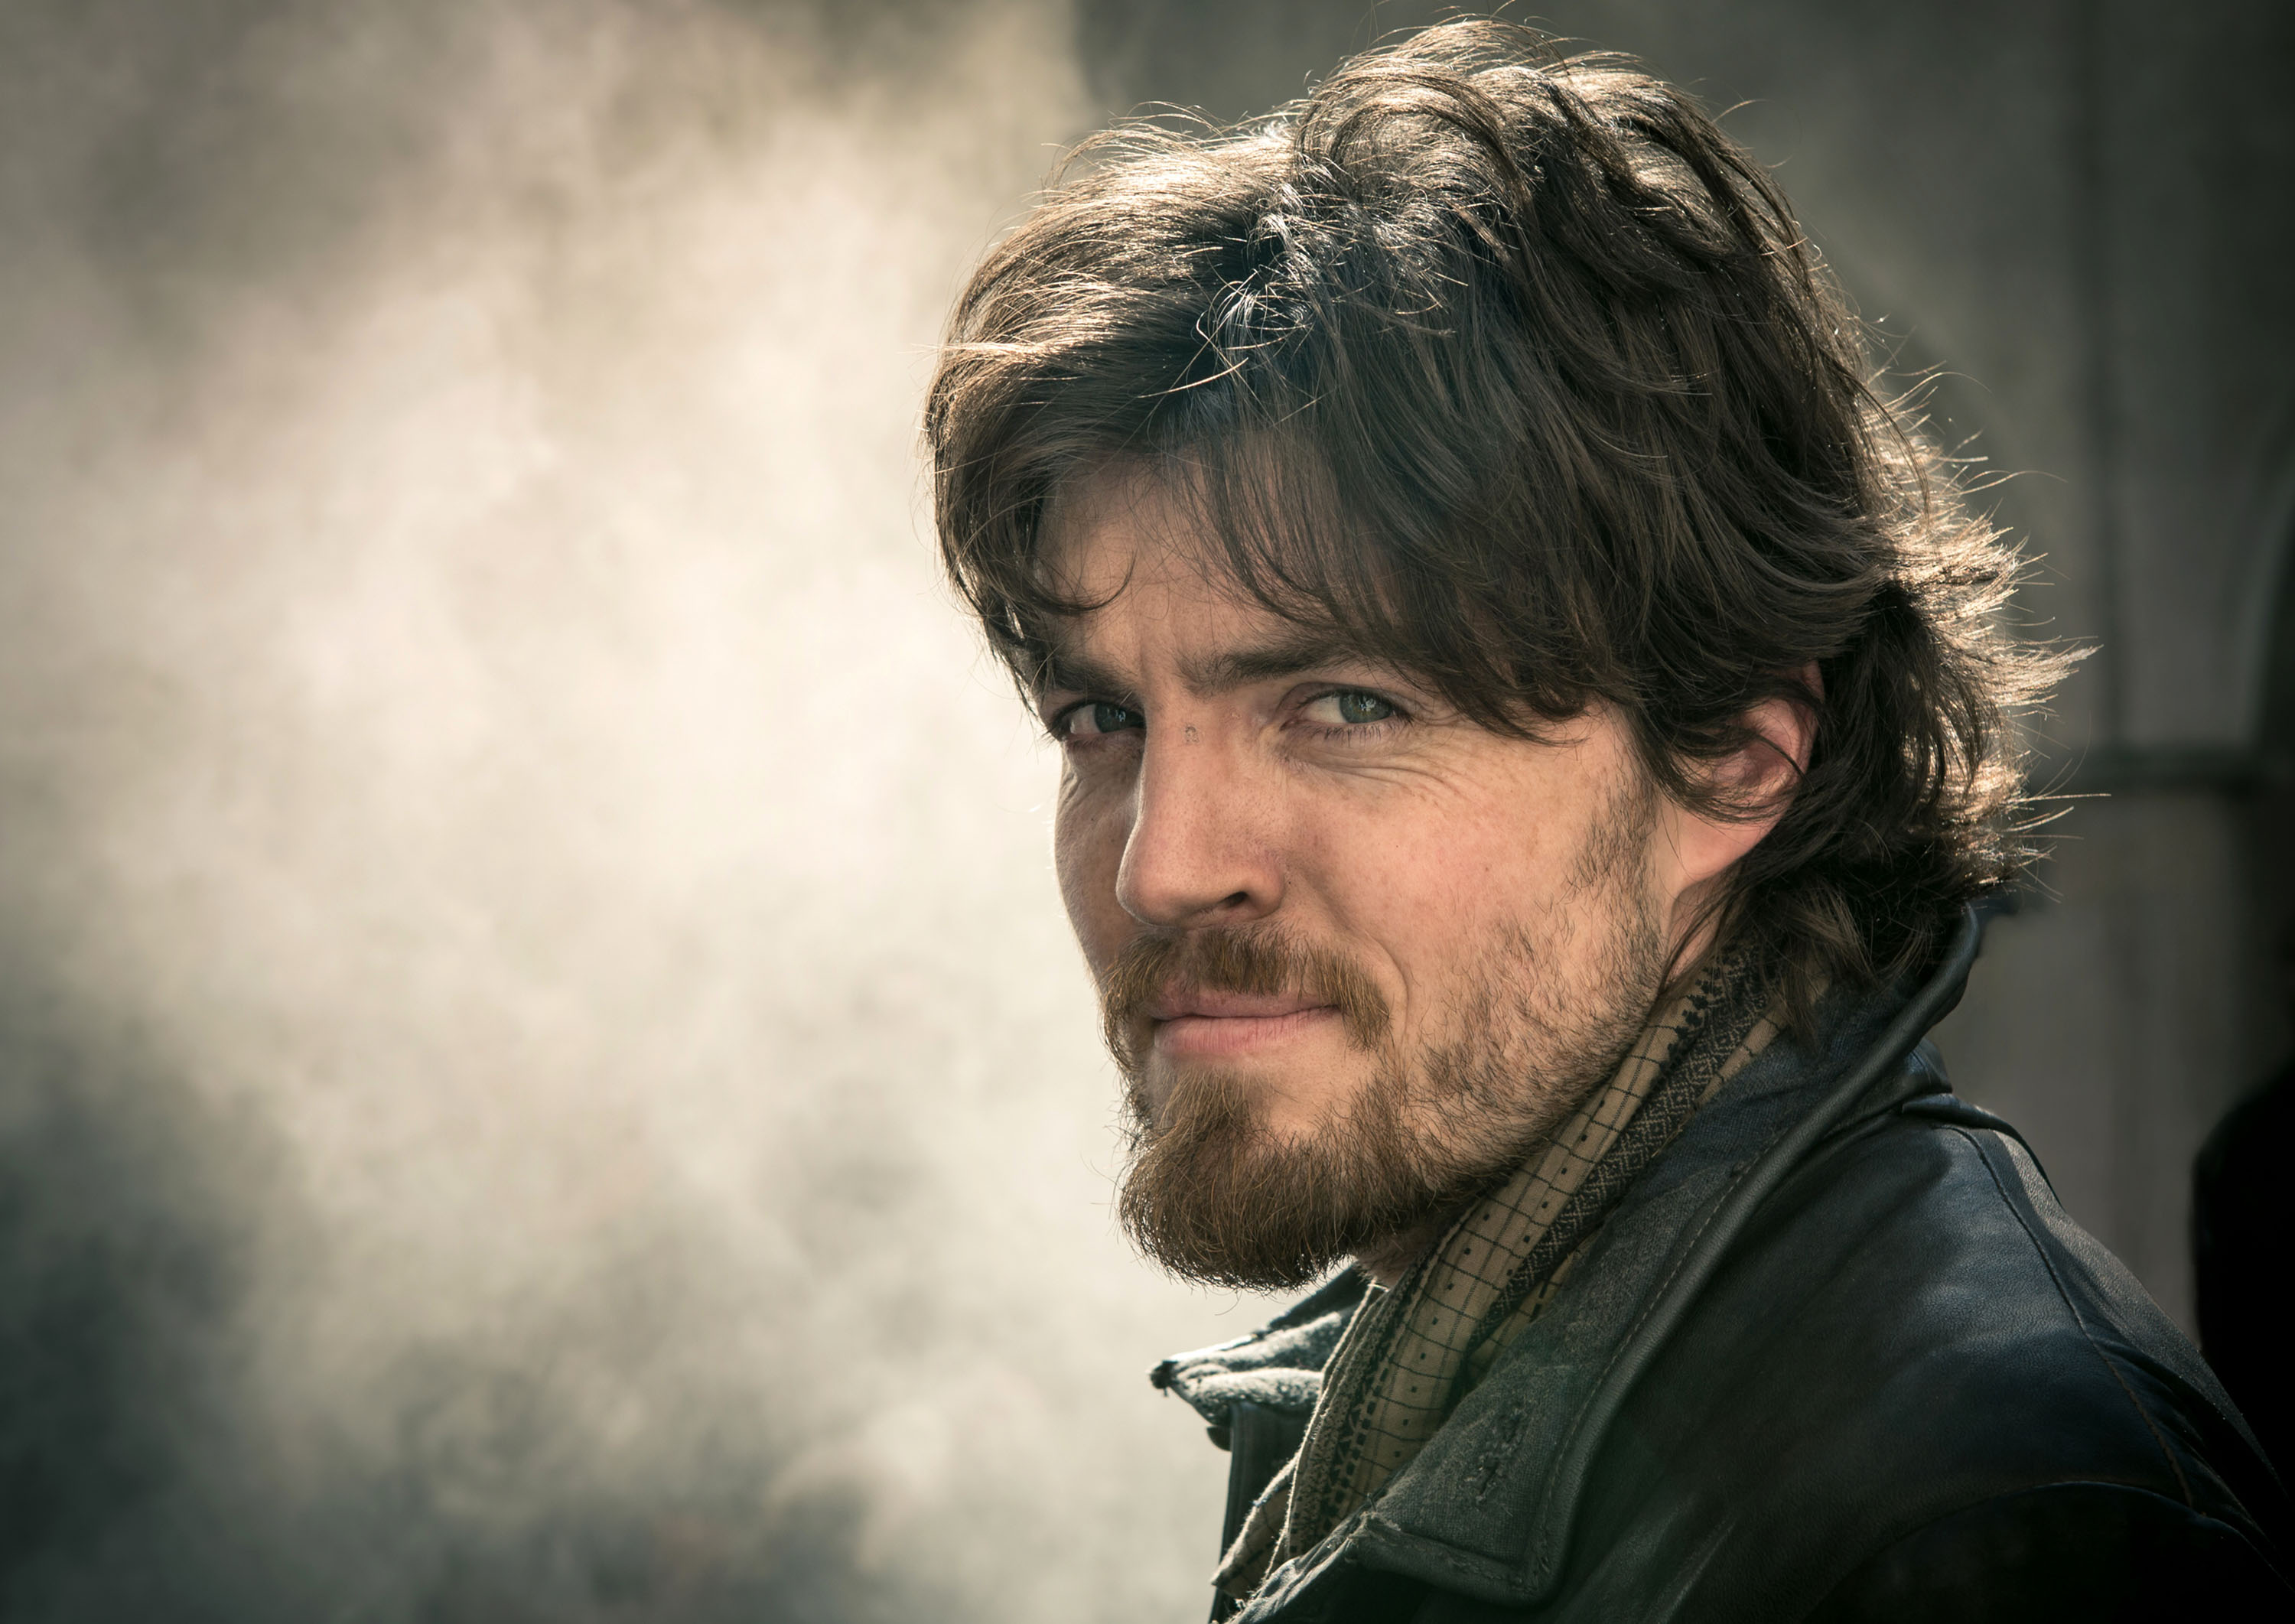 Strike: Troubled Blood cast: Who stars with Tom Burke, when it is on BBC  One, and how many episodes there are